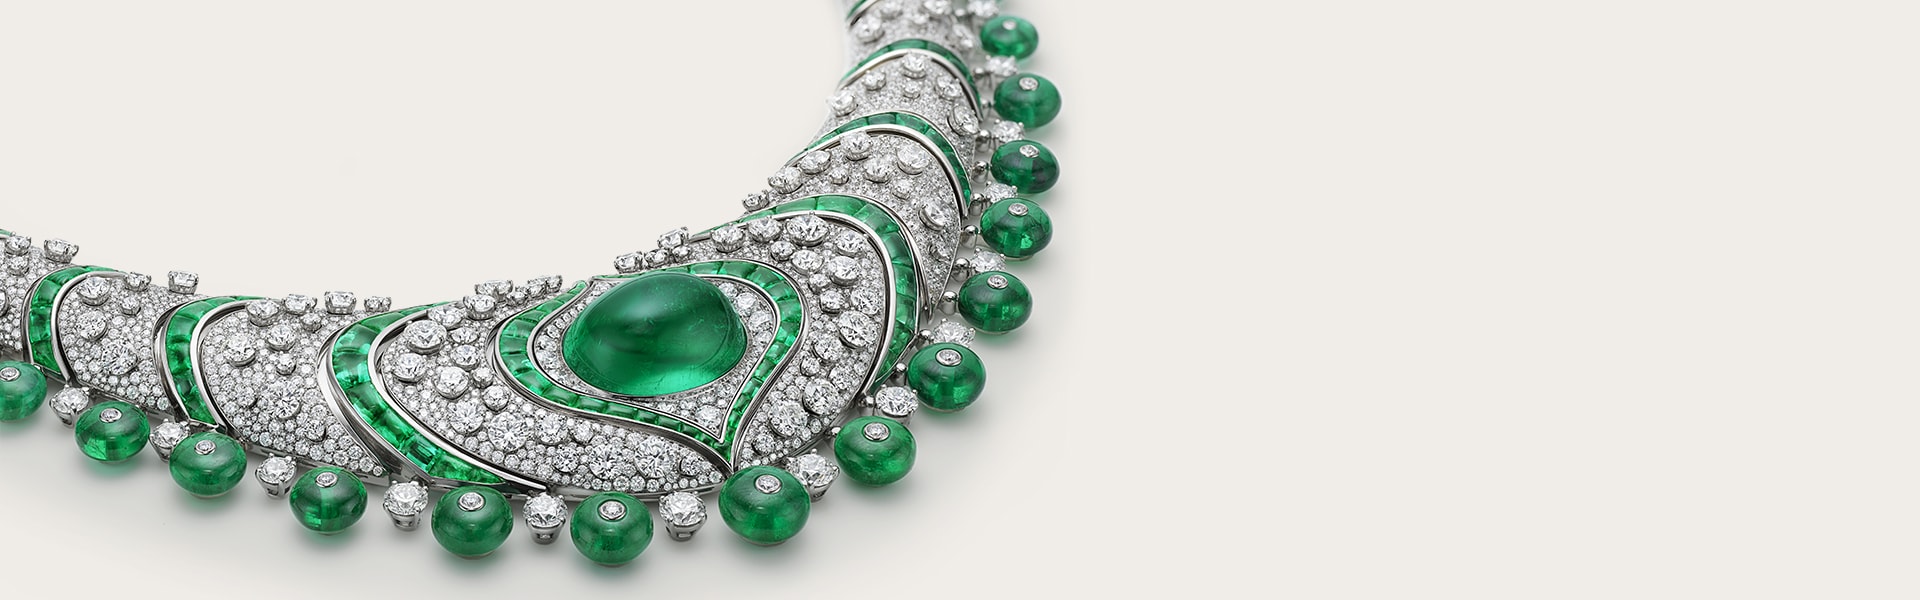 Emerald Lotus High Jewelry platinum necklace with emeralds and diamonds, close-up.